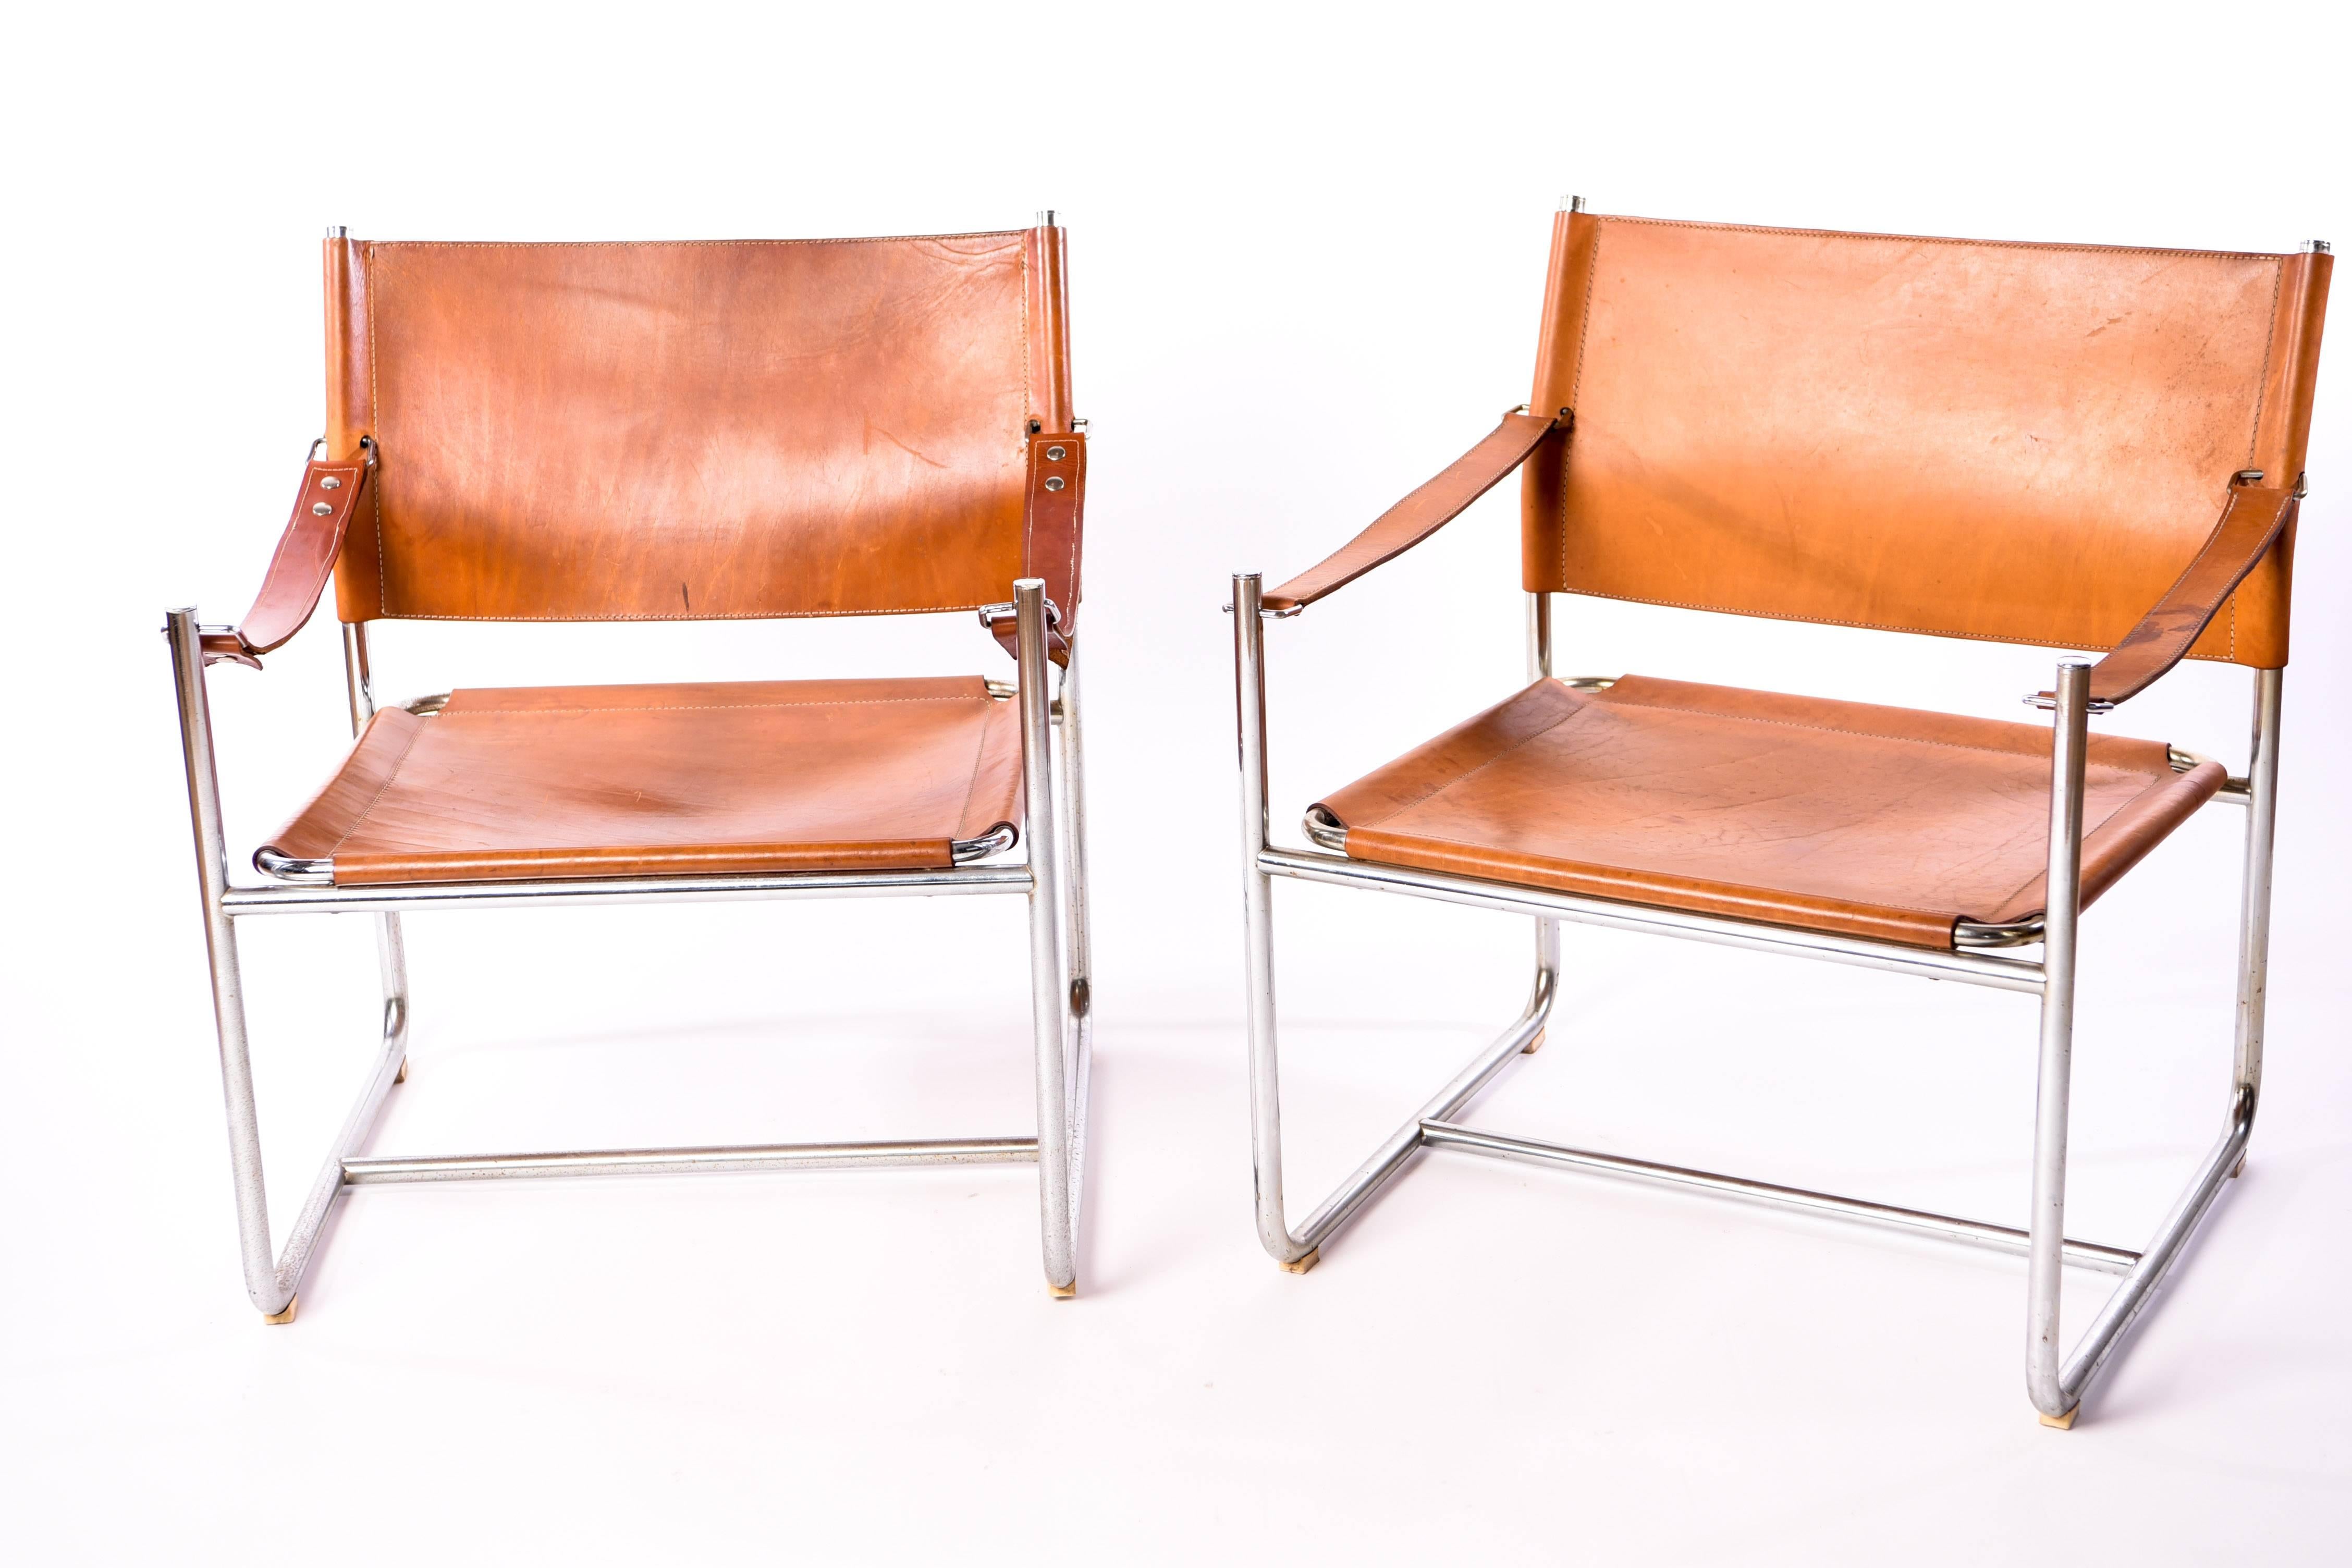 The 'Admiral' leather safari chair was designed by Karin Mobring for Ikea in the early 1970s. It is made from a chrome frame and patinated leather. This beautiful pair has a Classic midcentury appeal.